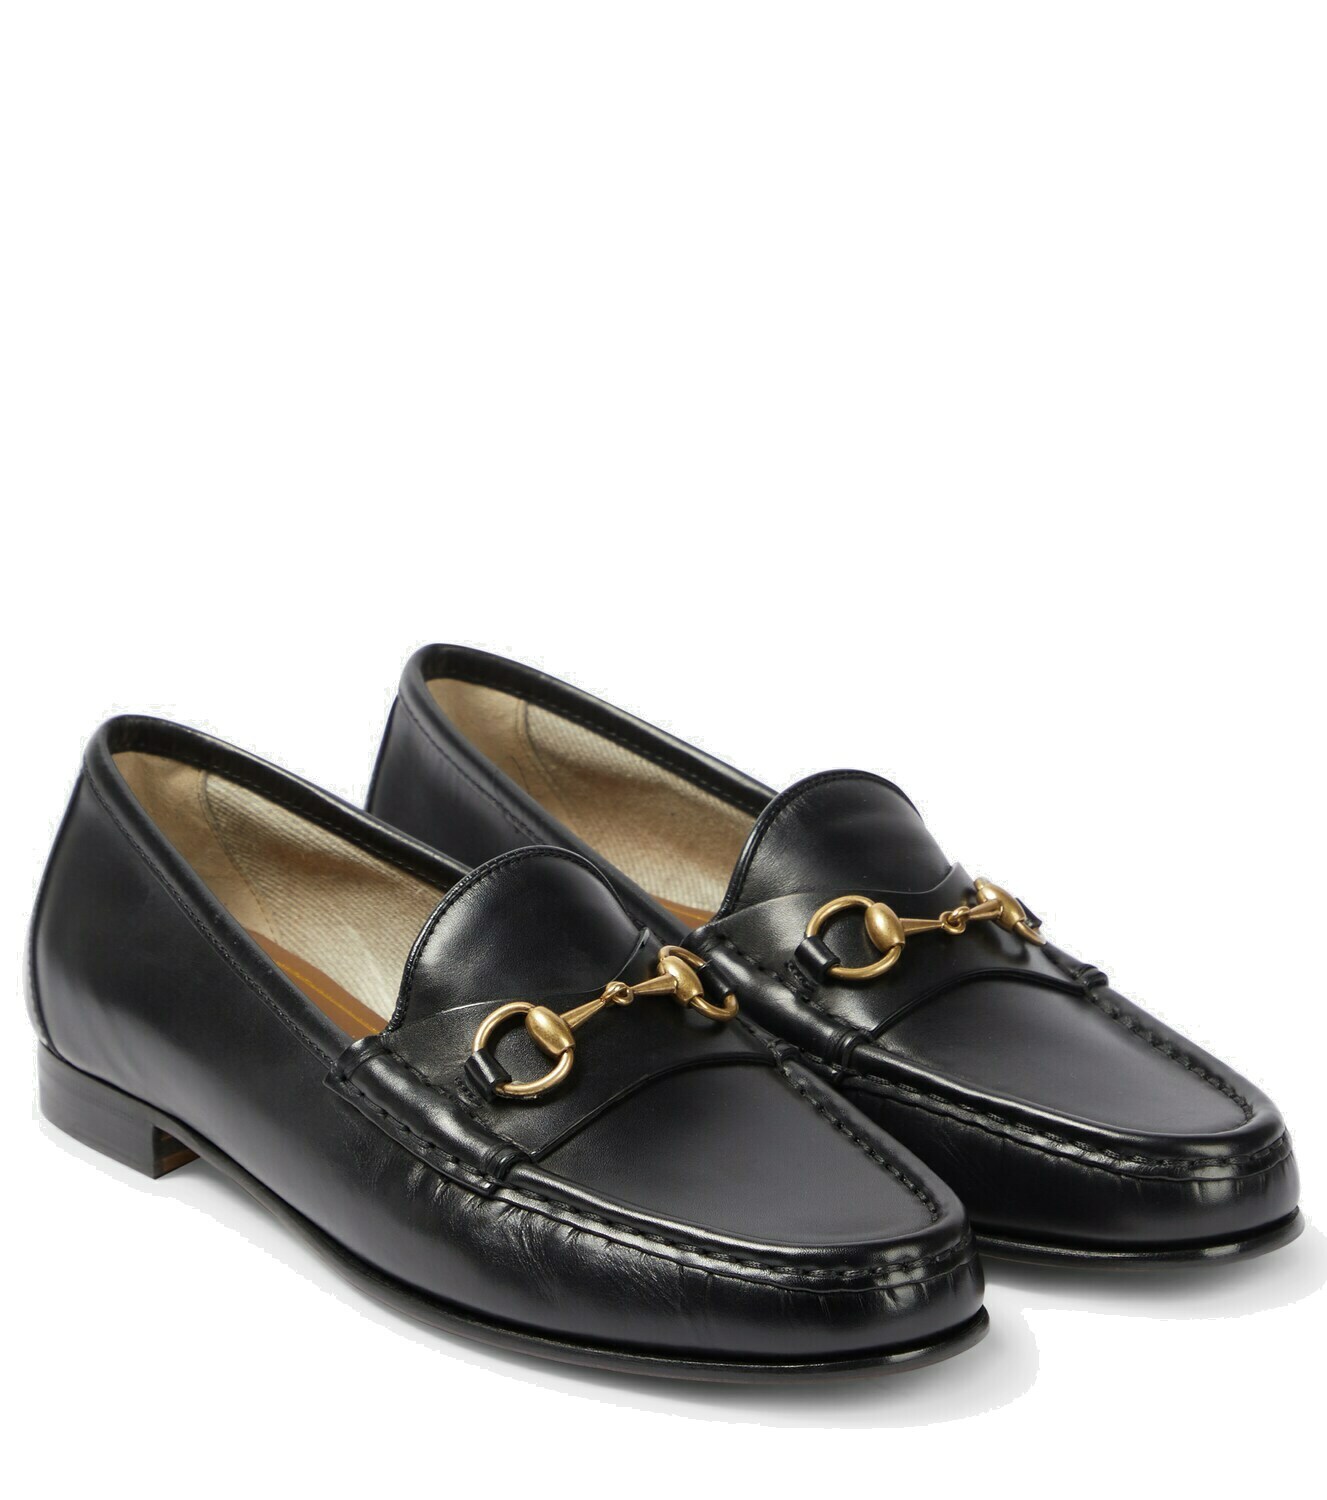 Gucci - 1953 Horsebit leather loafers Gucci